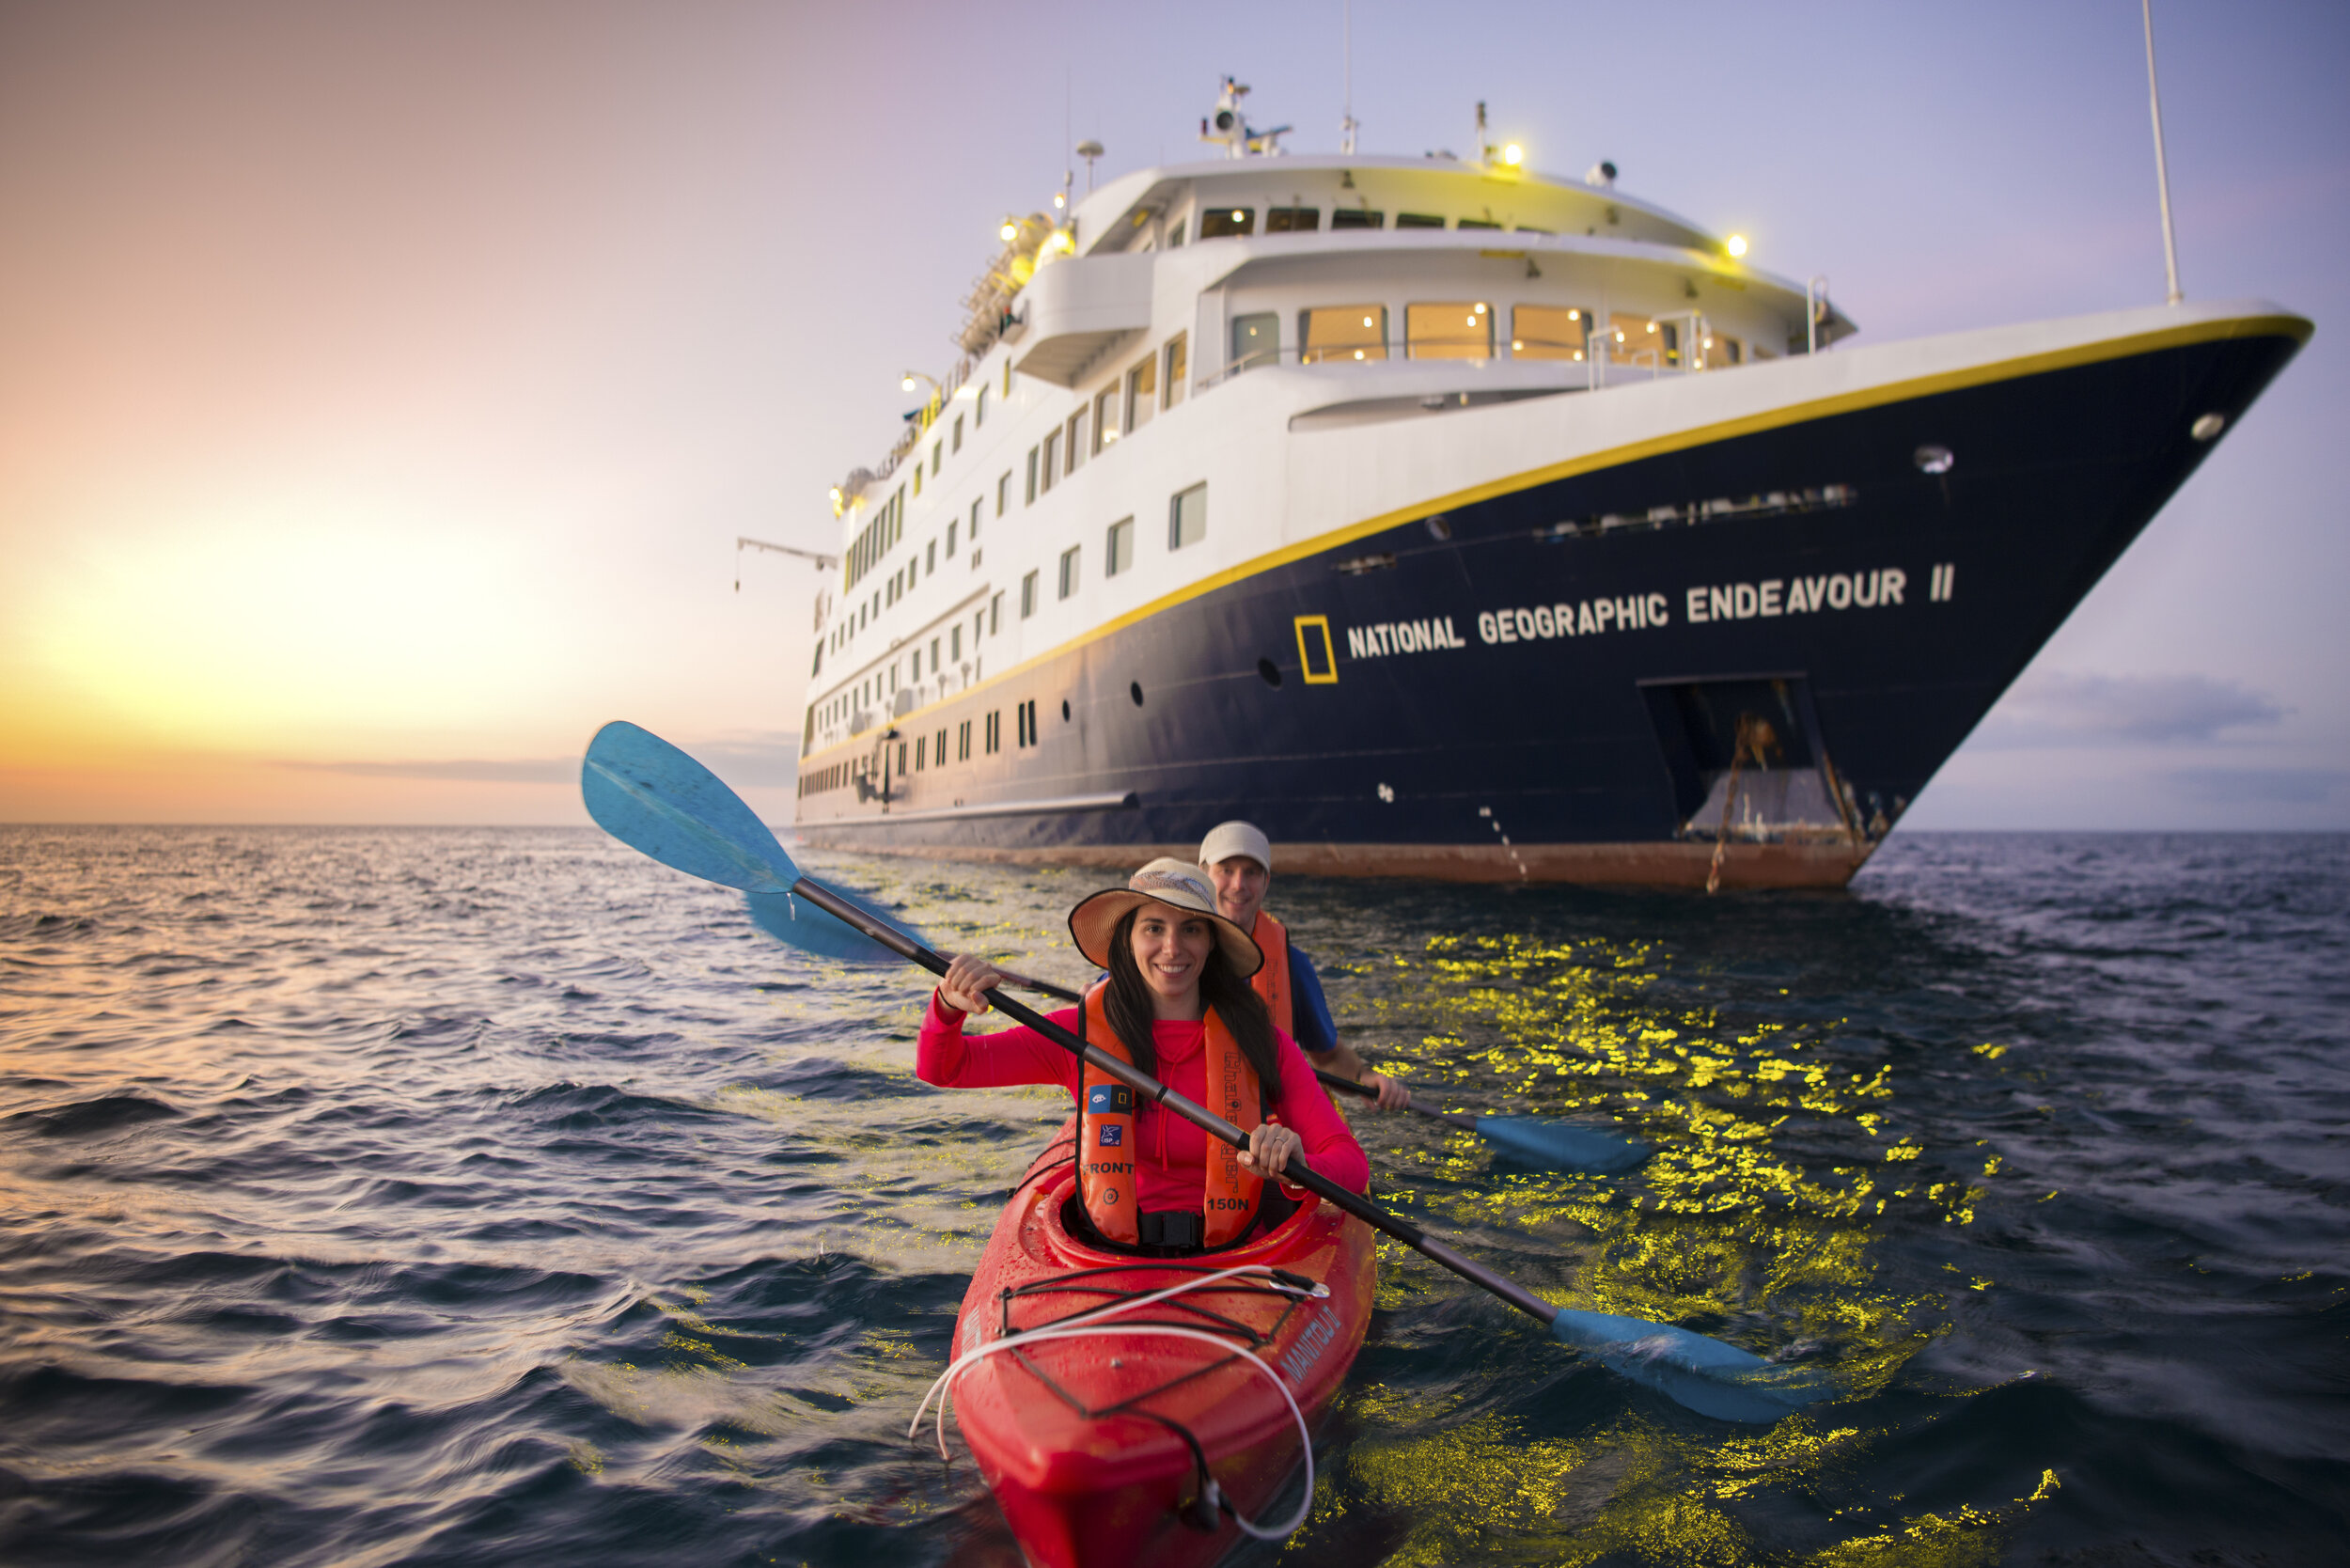   Guests kayaking near the National Geographic Endeavour II (photo credit: Lindblad Expeditions)  